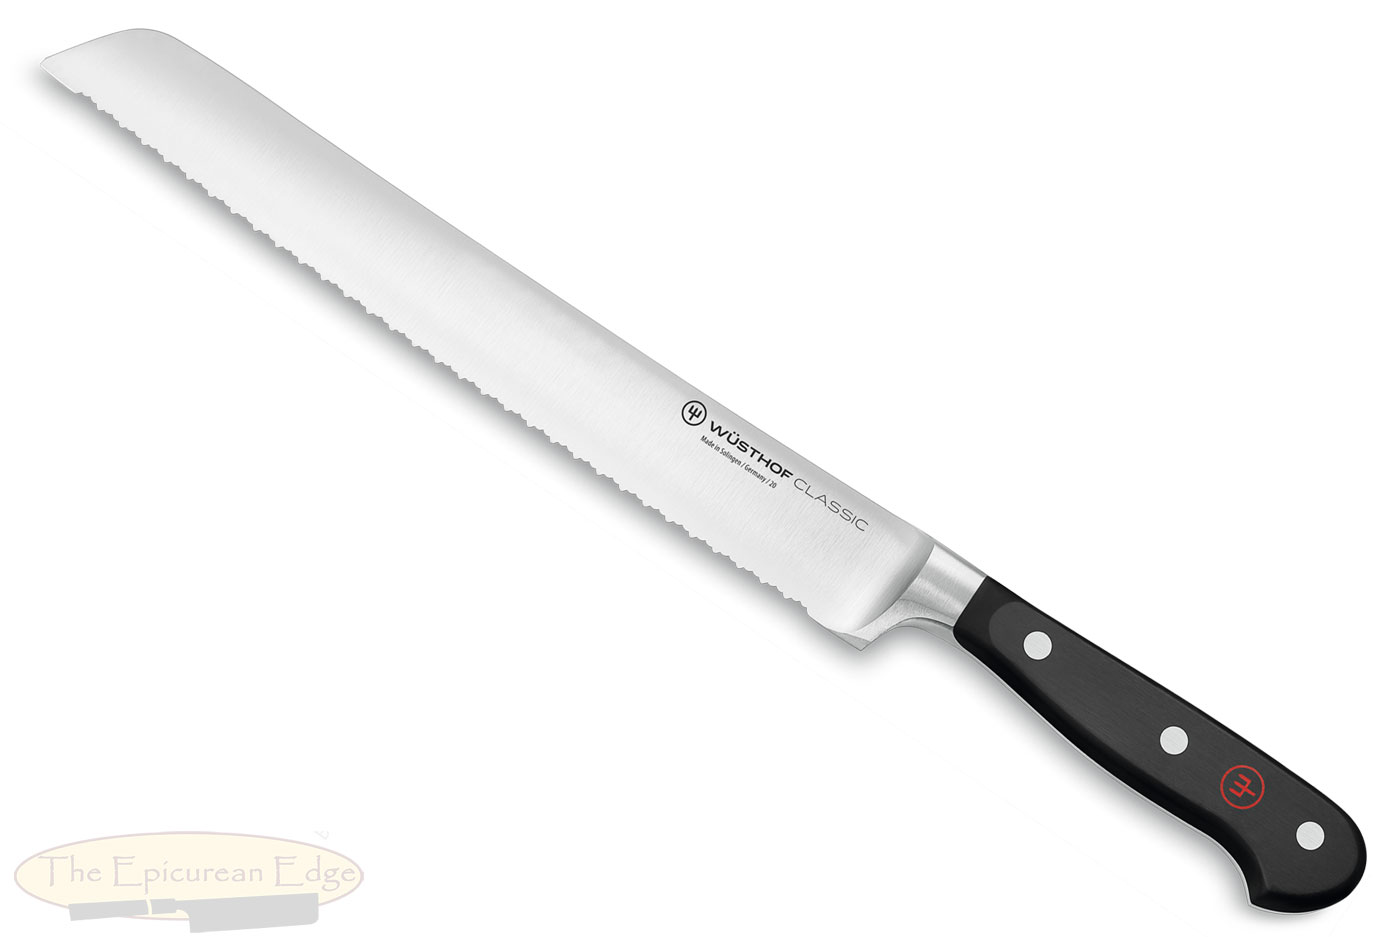 Wusthof-Trident Classic Double Serrated Bread Knife - 9 in. (1040101123)